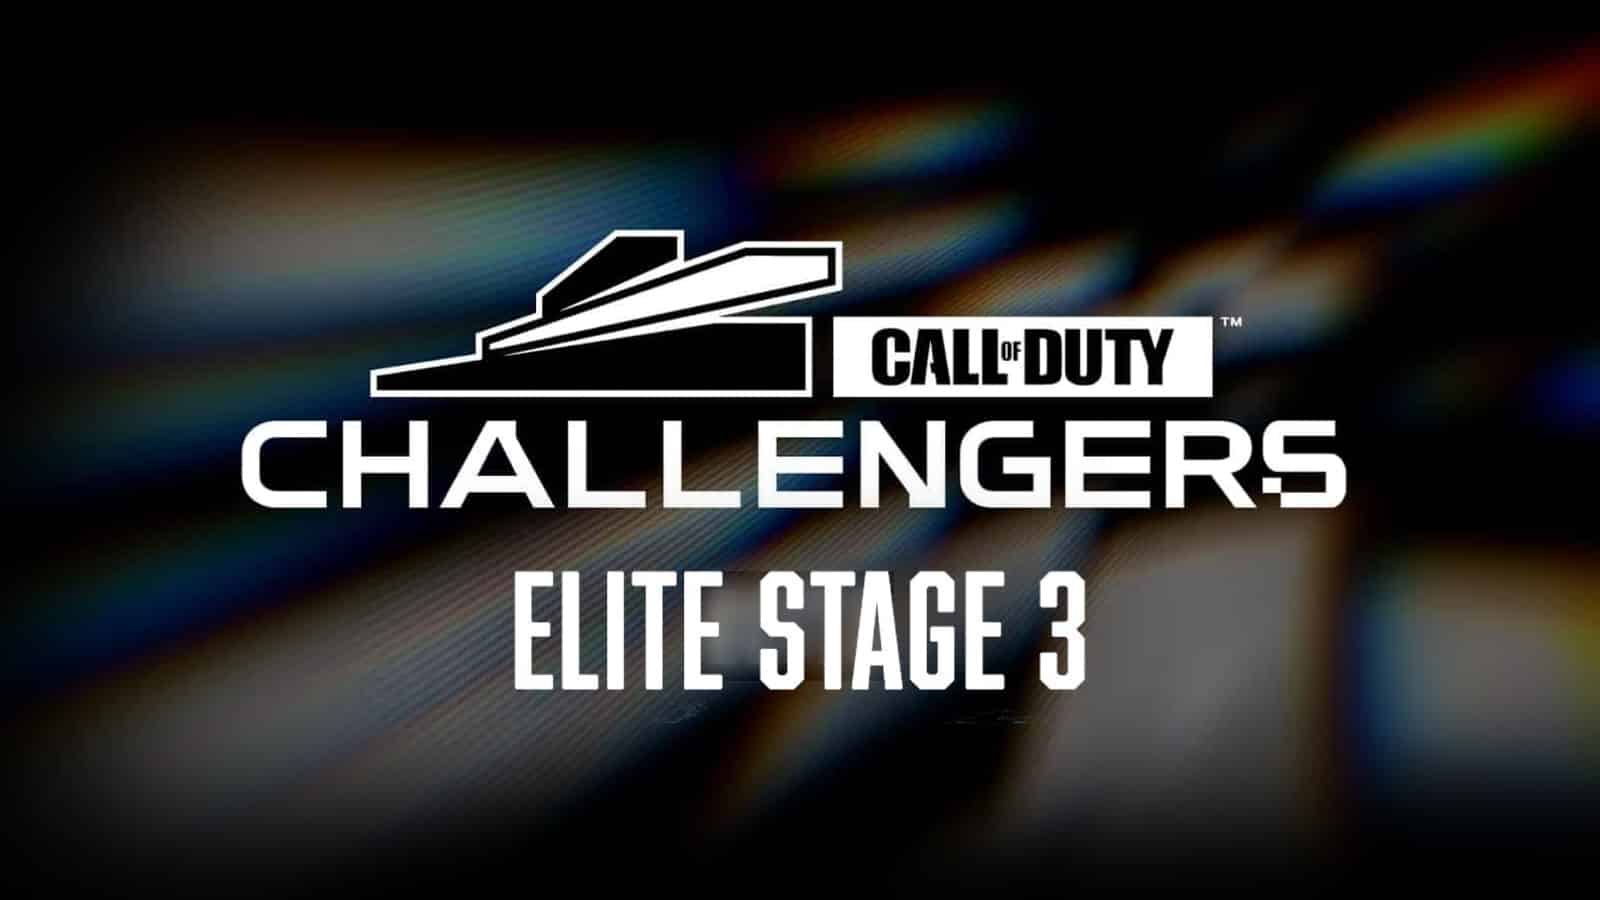 Call of Duty Challengers Elite Stage 3 placements